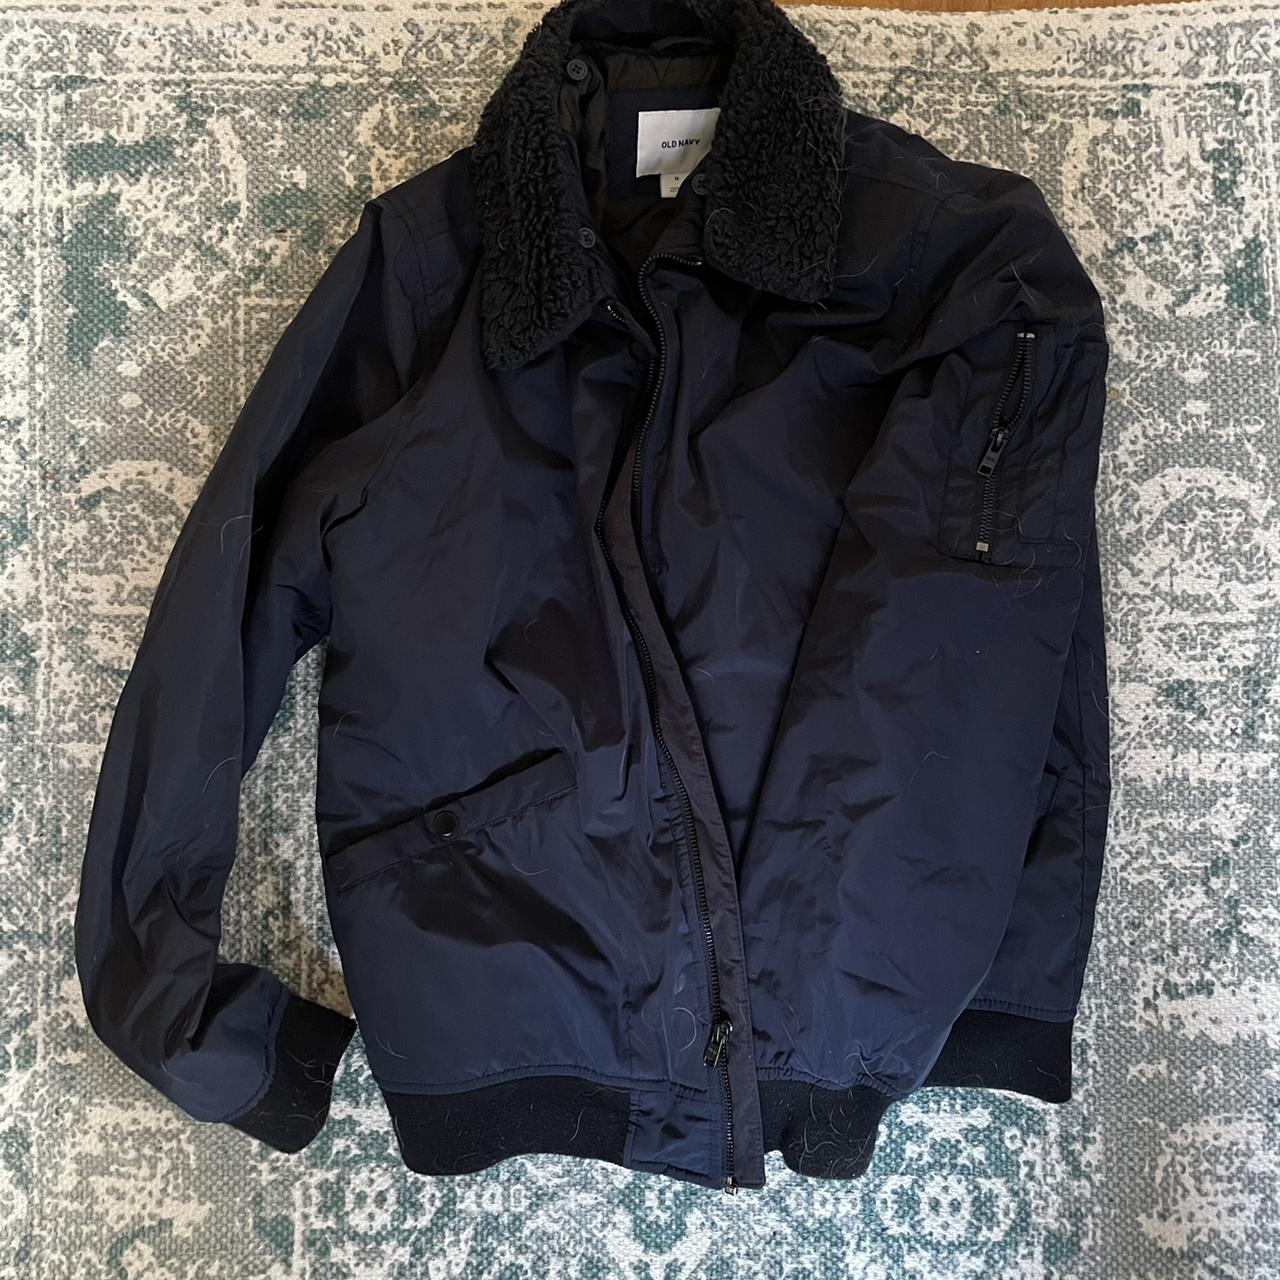 Warm and puffy trucker / bomber style jacket with... - Depop